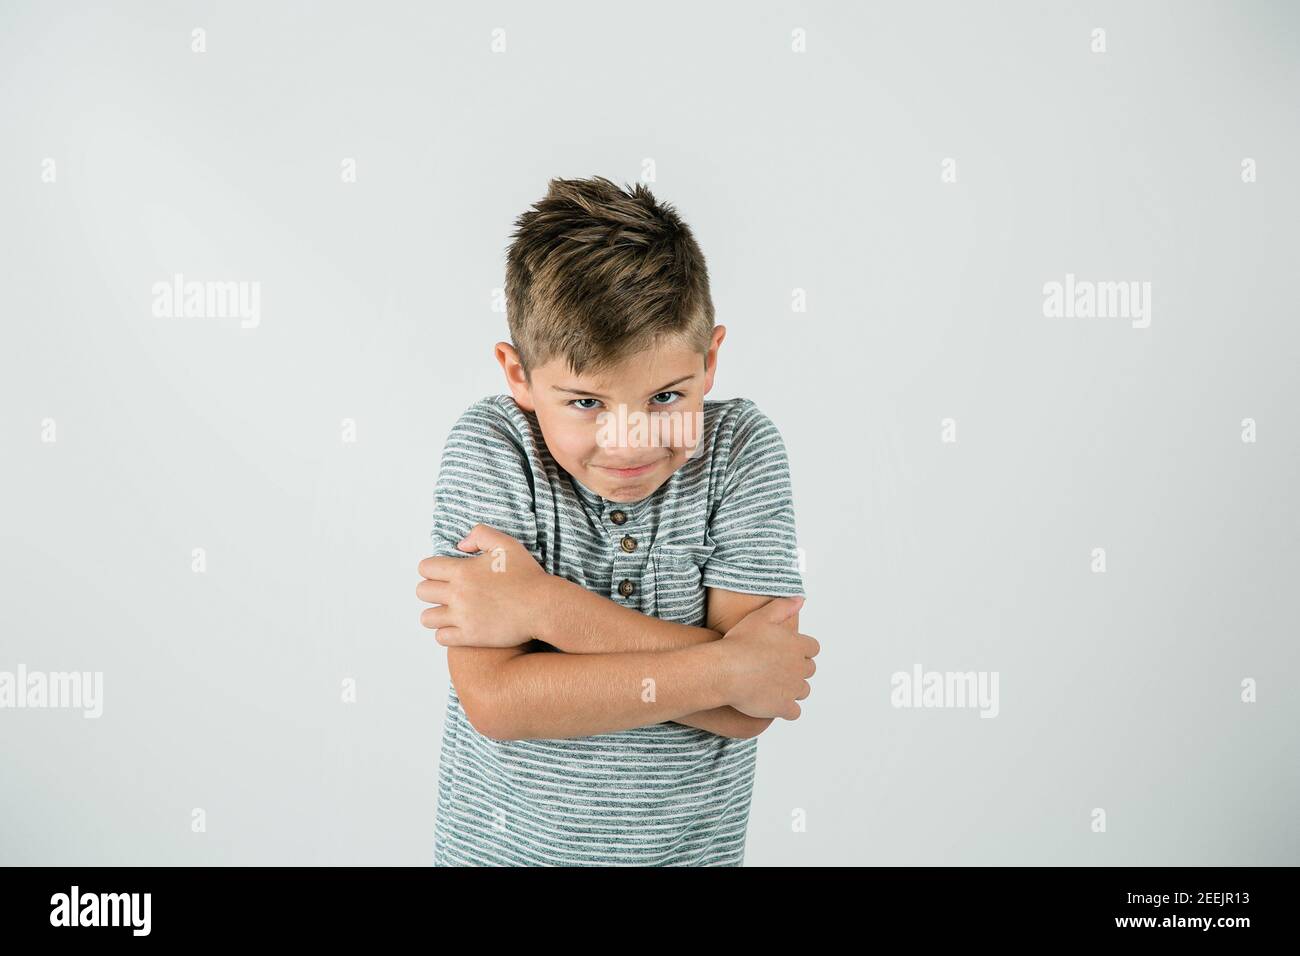 Little caucasian boy standing in a studio setting on a white backdrop. Stock Photo